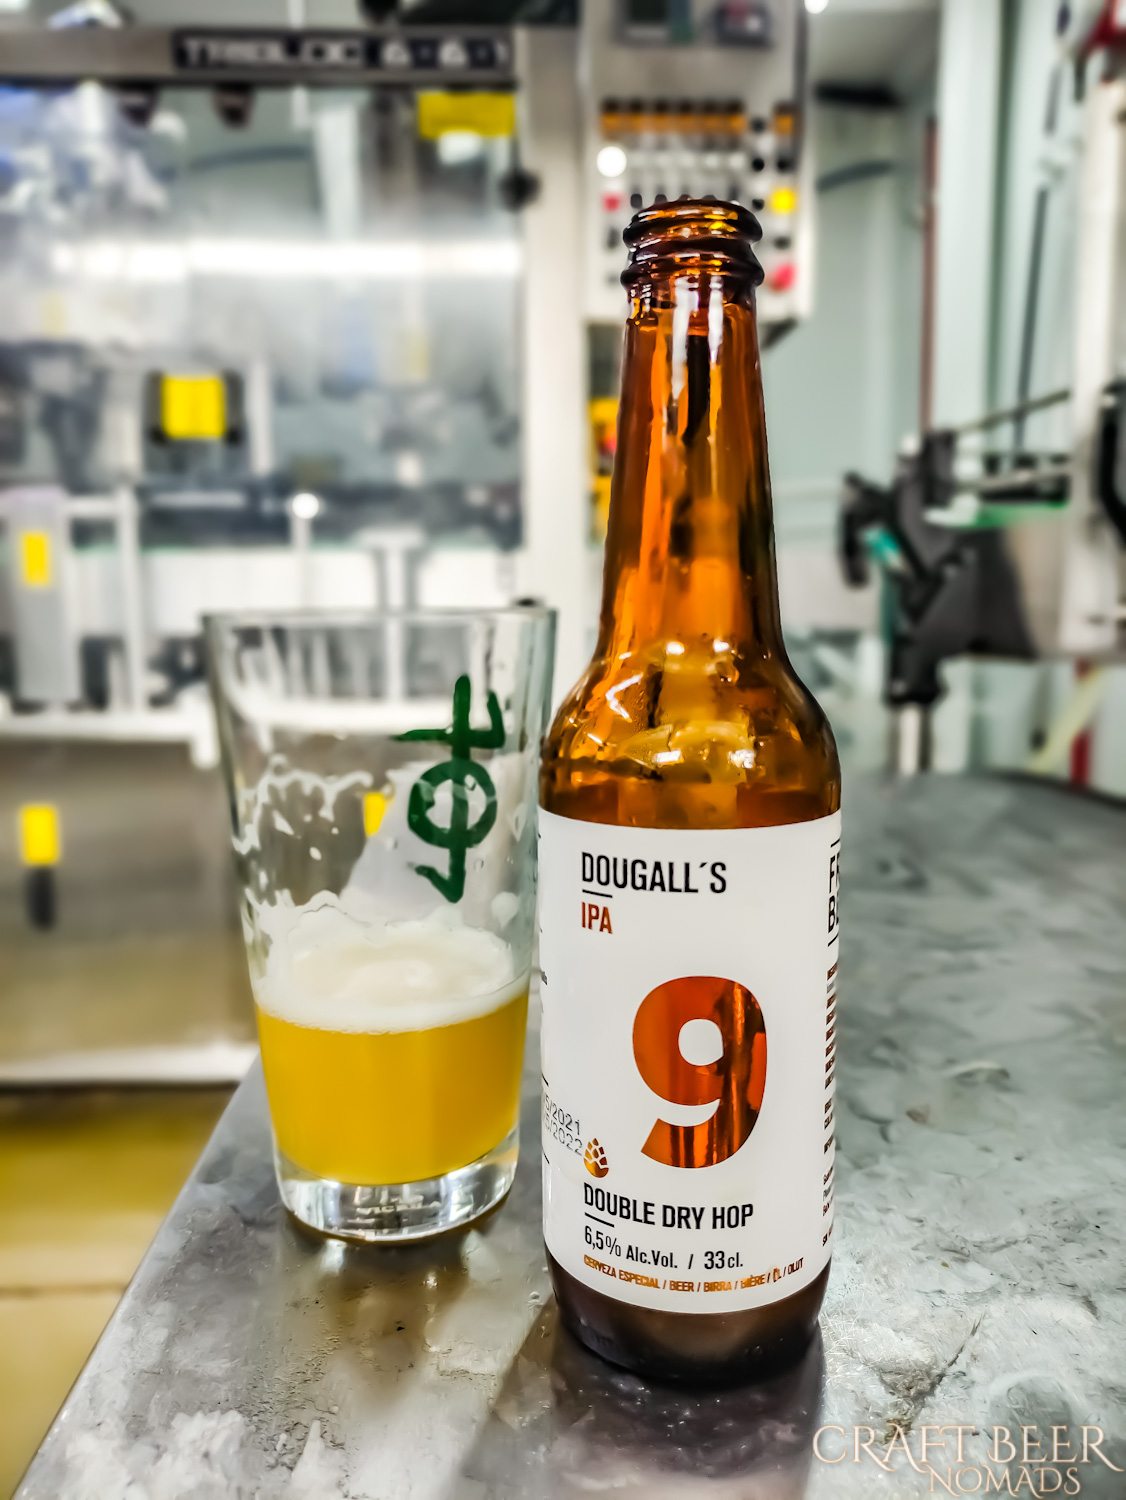 Dougal's 9 IPA from Spain